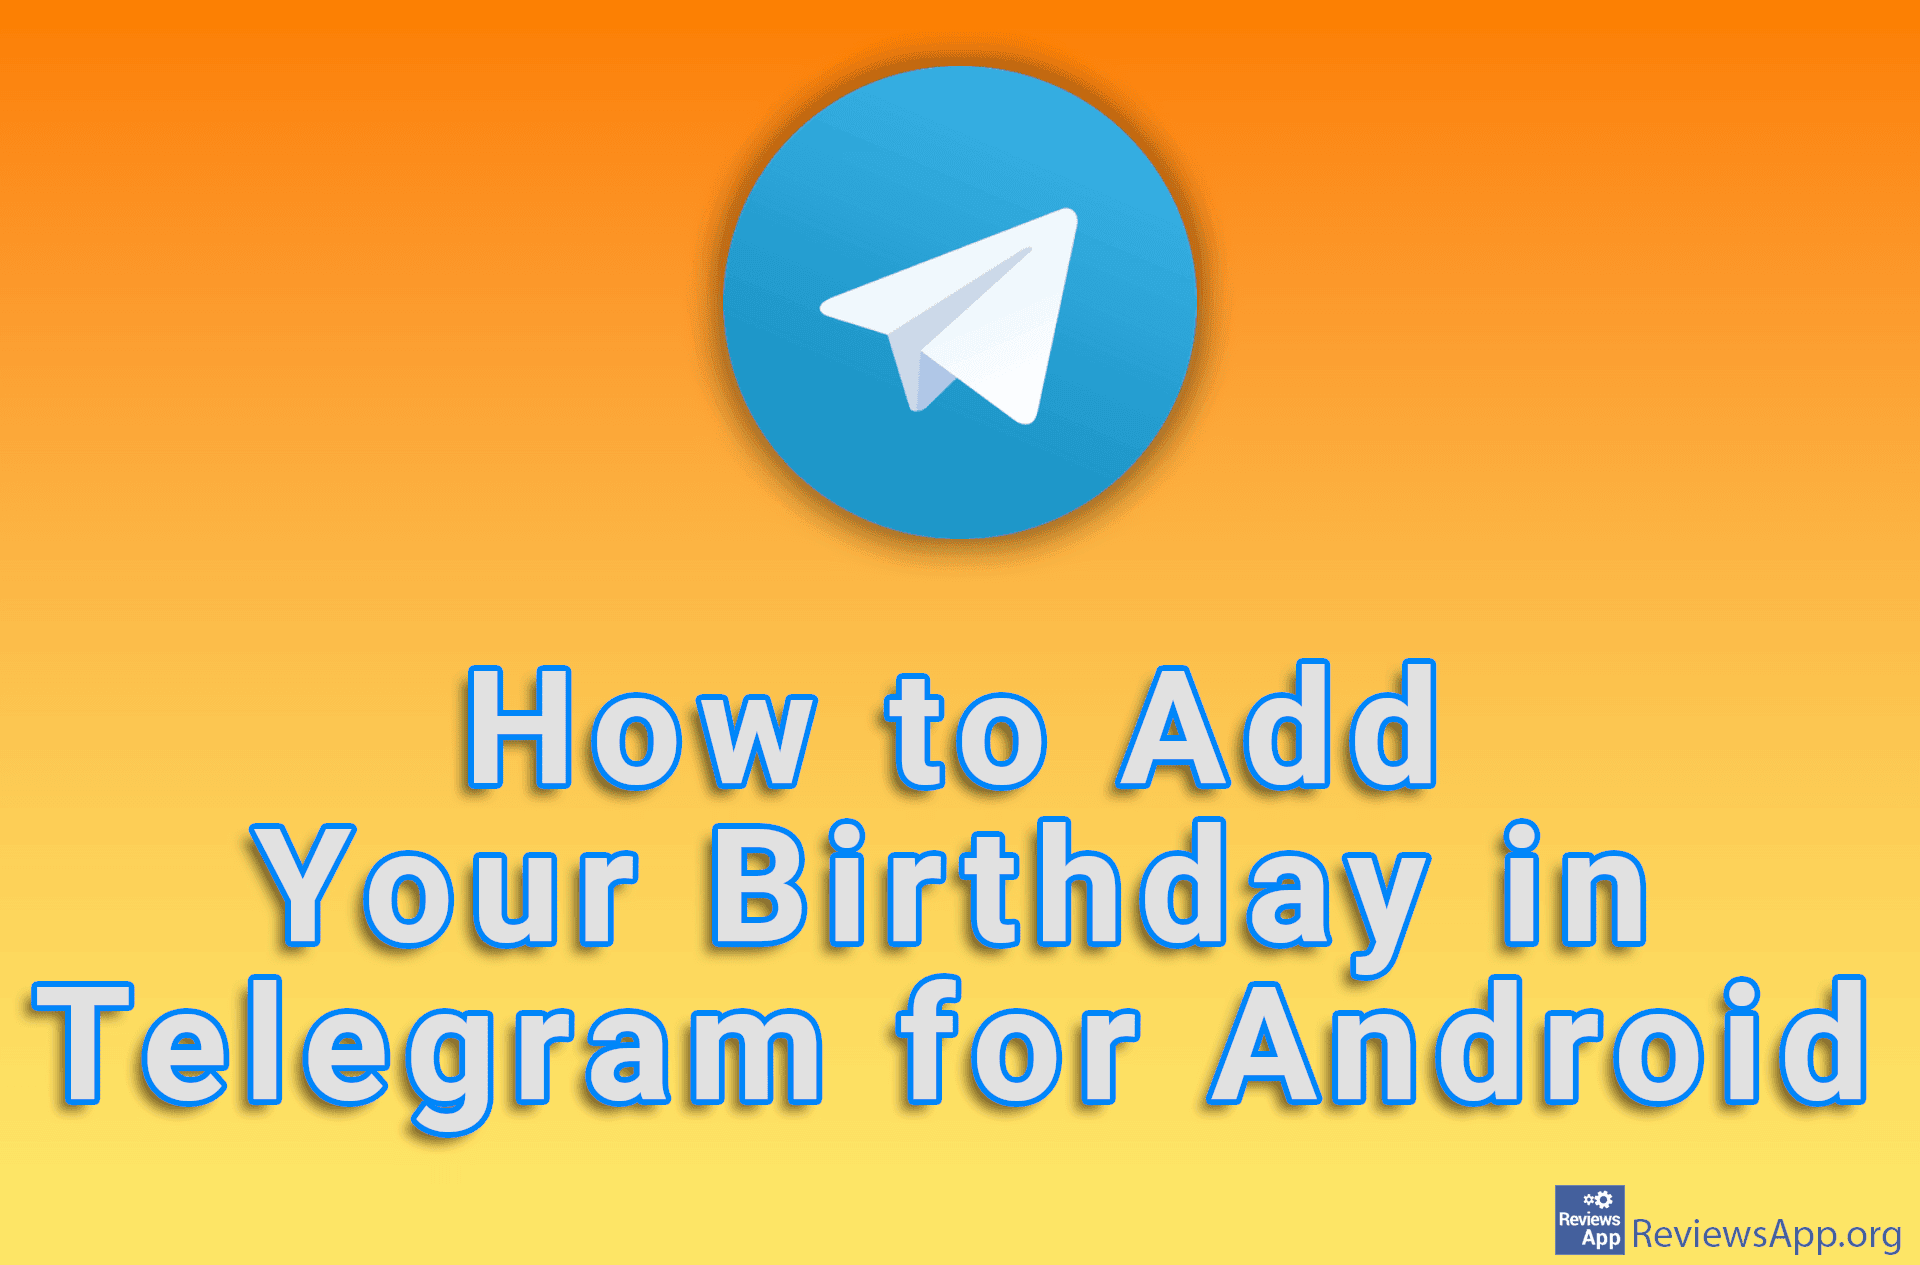 How to Add Your Birthday in Telegram for Android